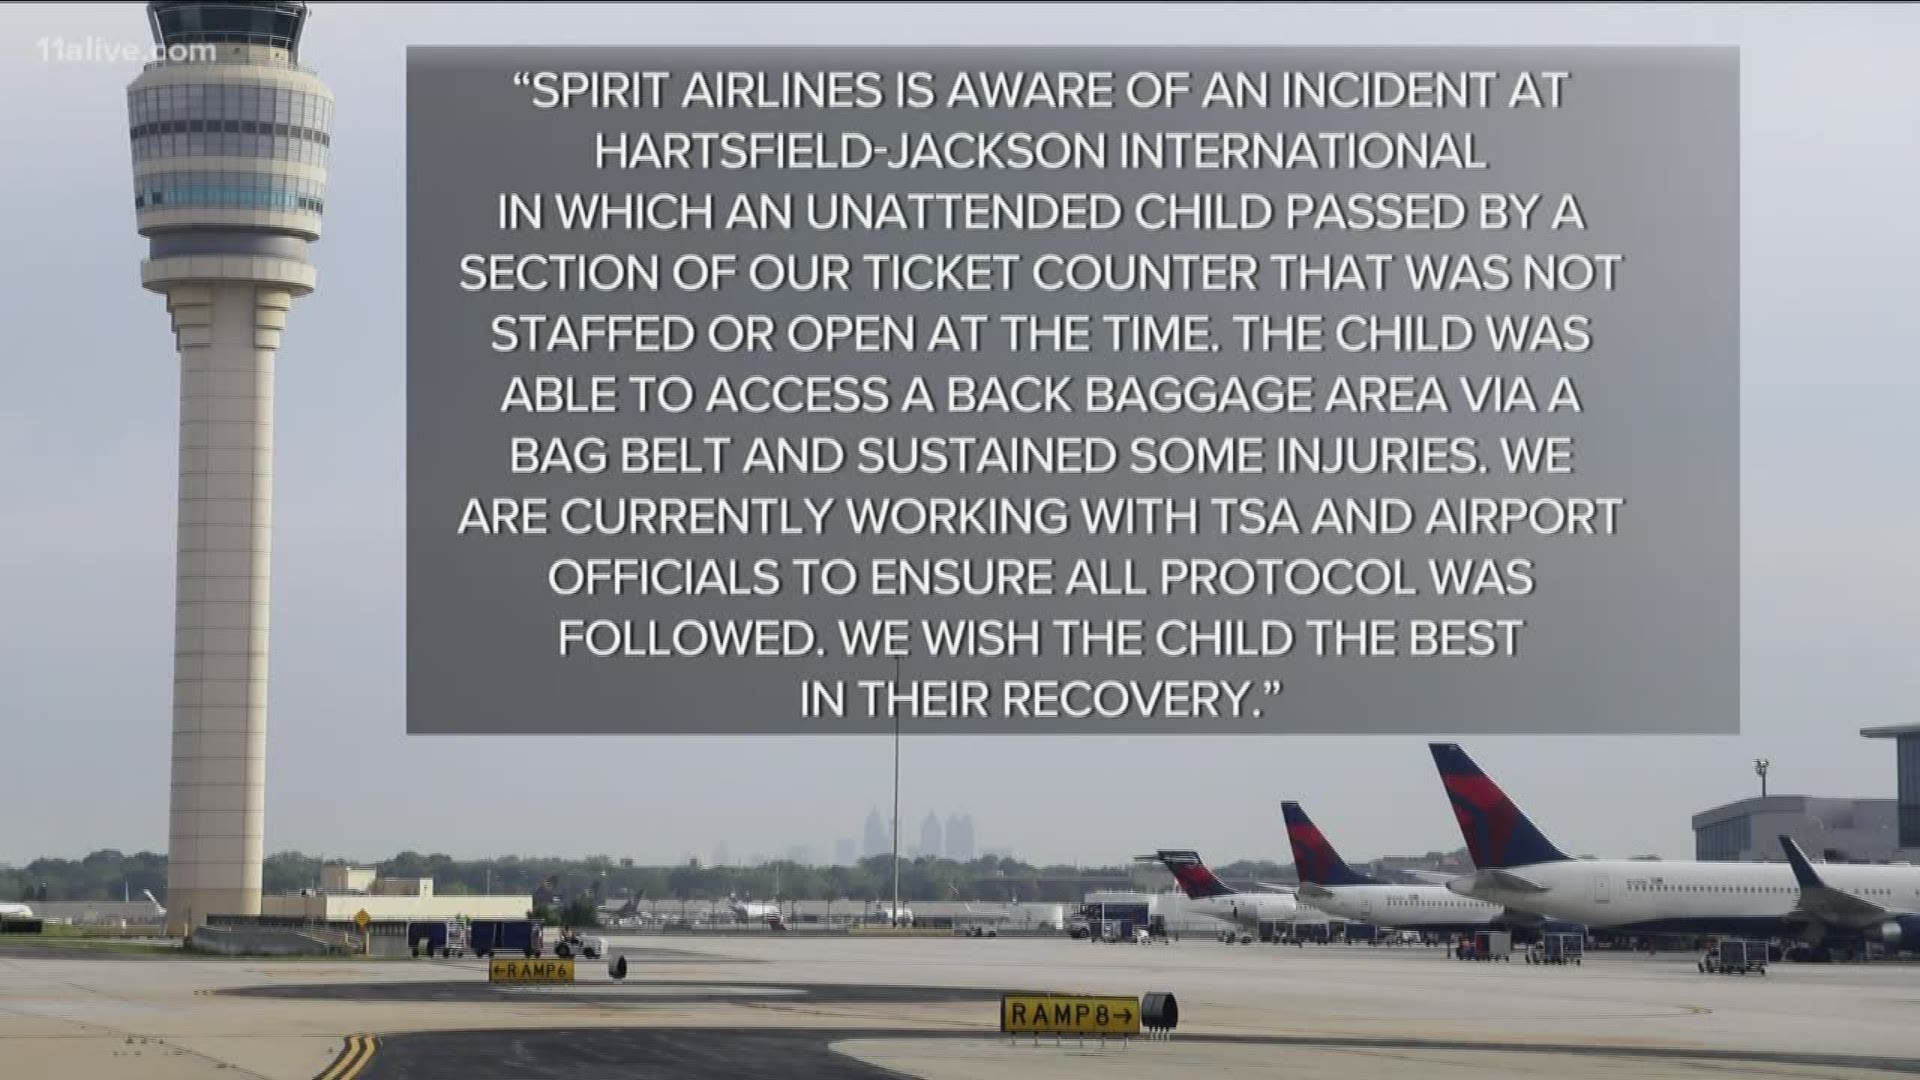 A police report from the Atlanta Police Department said a TSA agent flagged down an officer around 3 p.m. to say that a child "that came off the baggage conveyor belt in the bag room" was "hurt pretty bad."